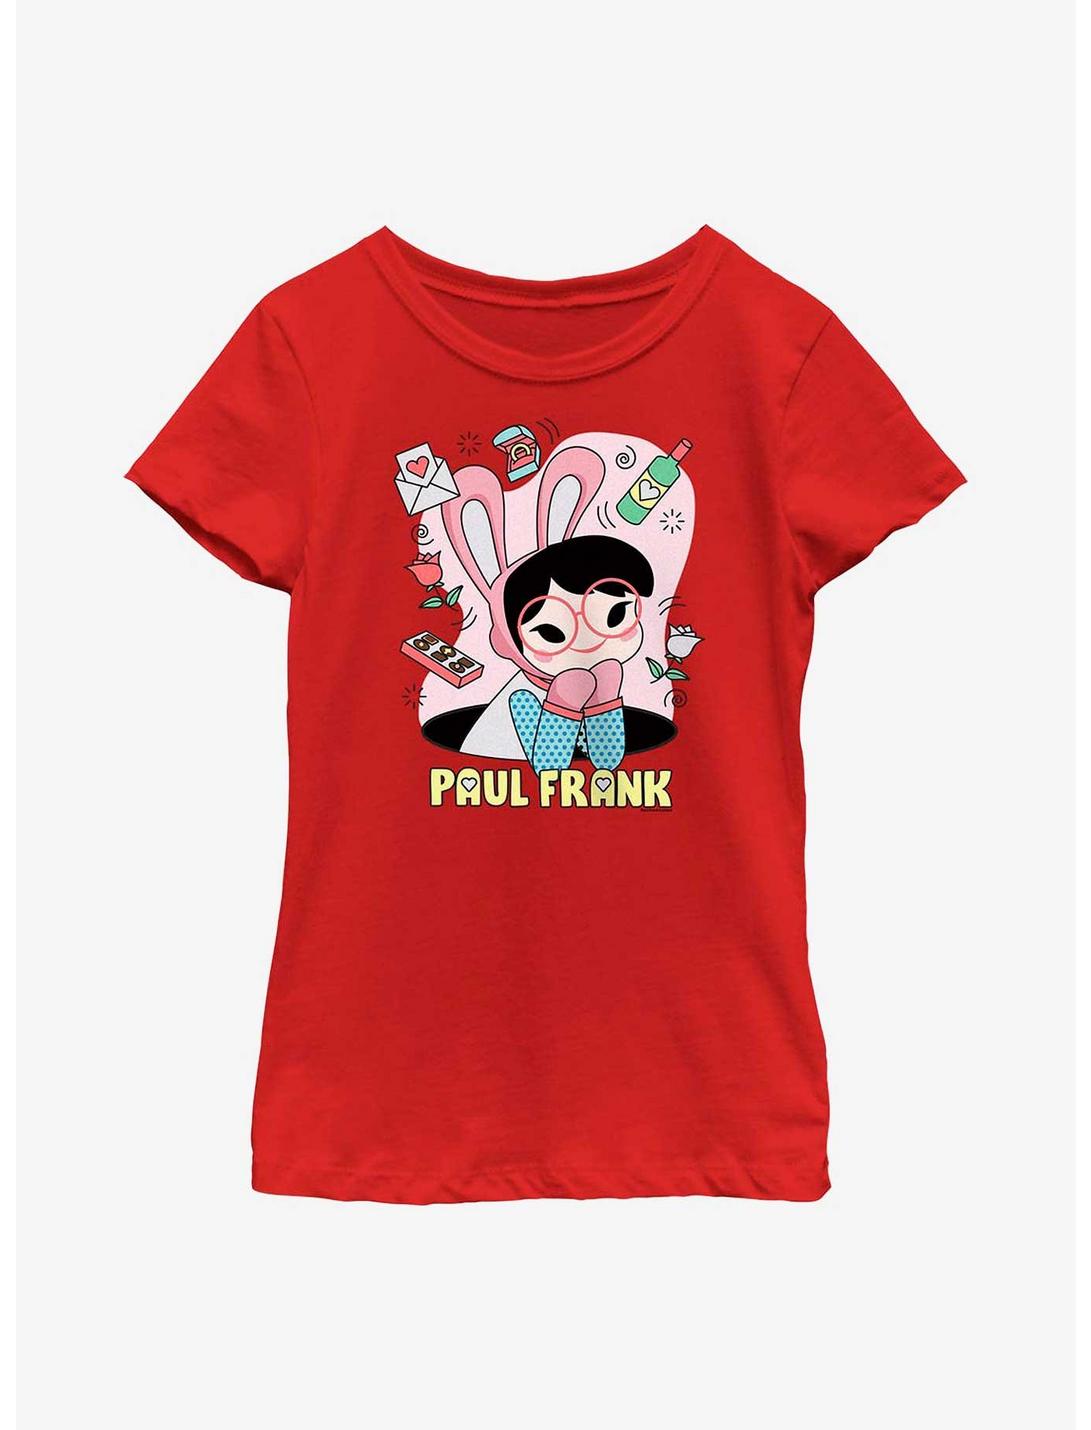 Paul Frank Bunny Girl Valentine Youth Girls T-Shirt, RED, hi-res